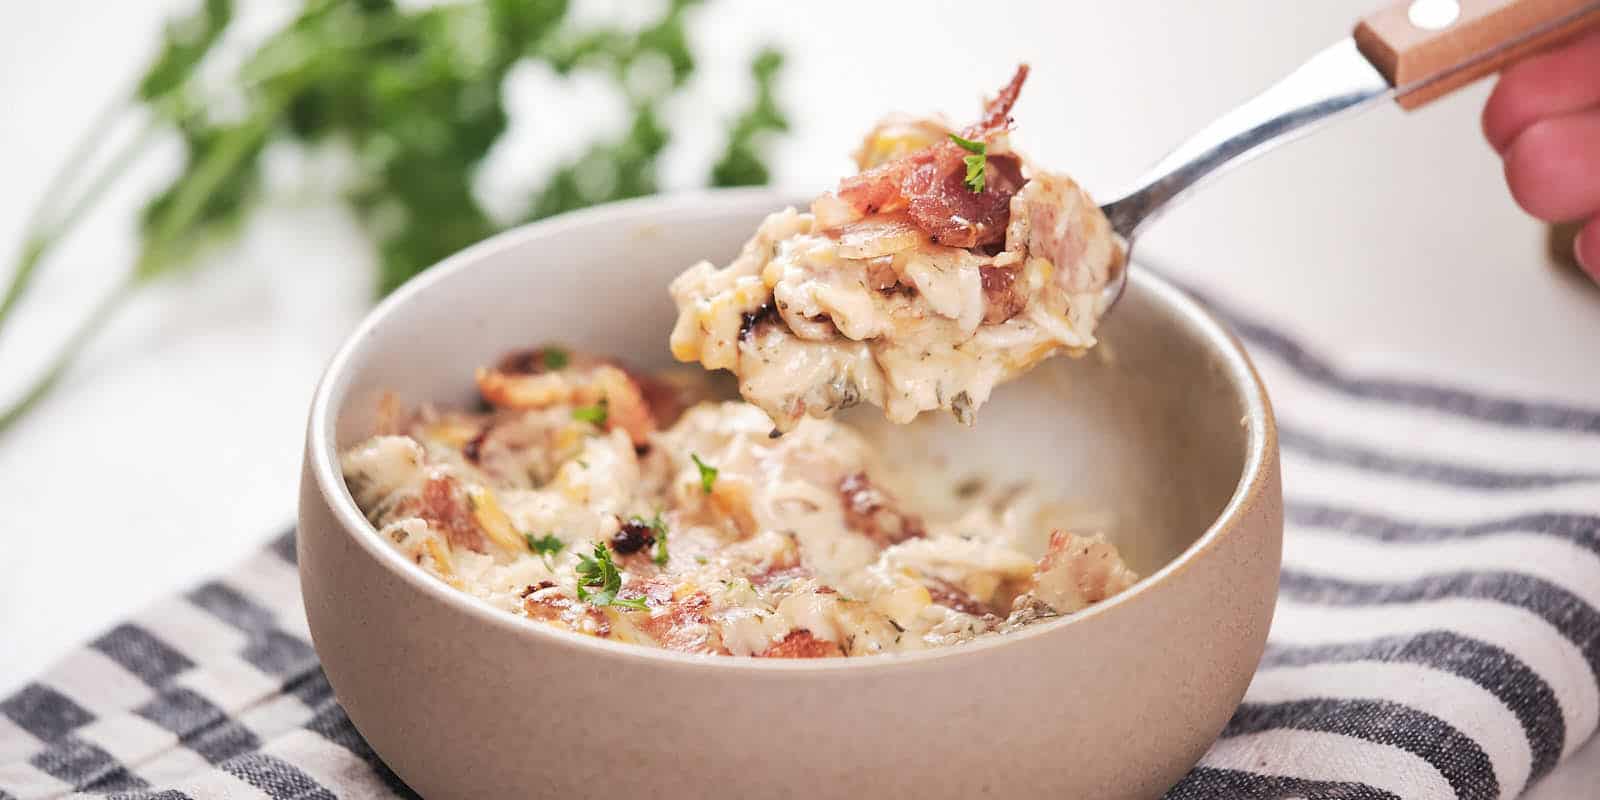 A picutre of cheesy chicken with bacon and dried parsley.